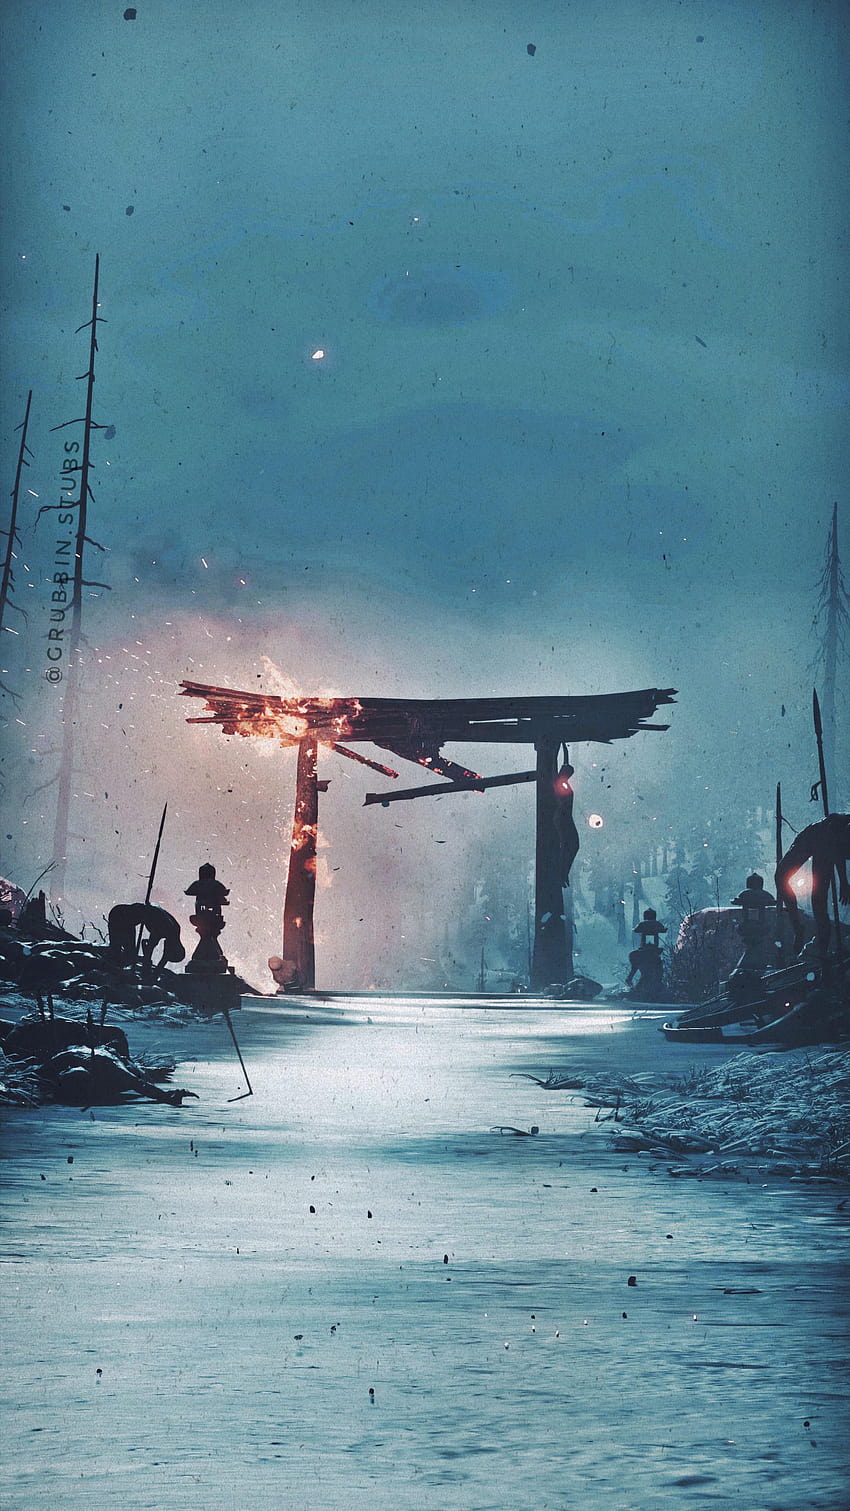 Ghost of tsushima has to be one of the most beautiful games ever made. :  r/playstation